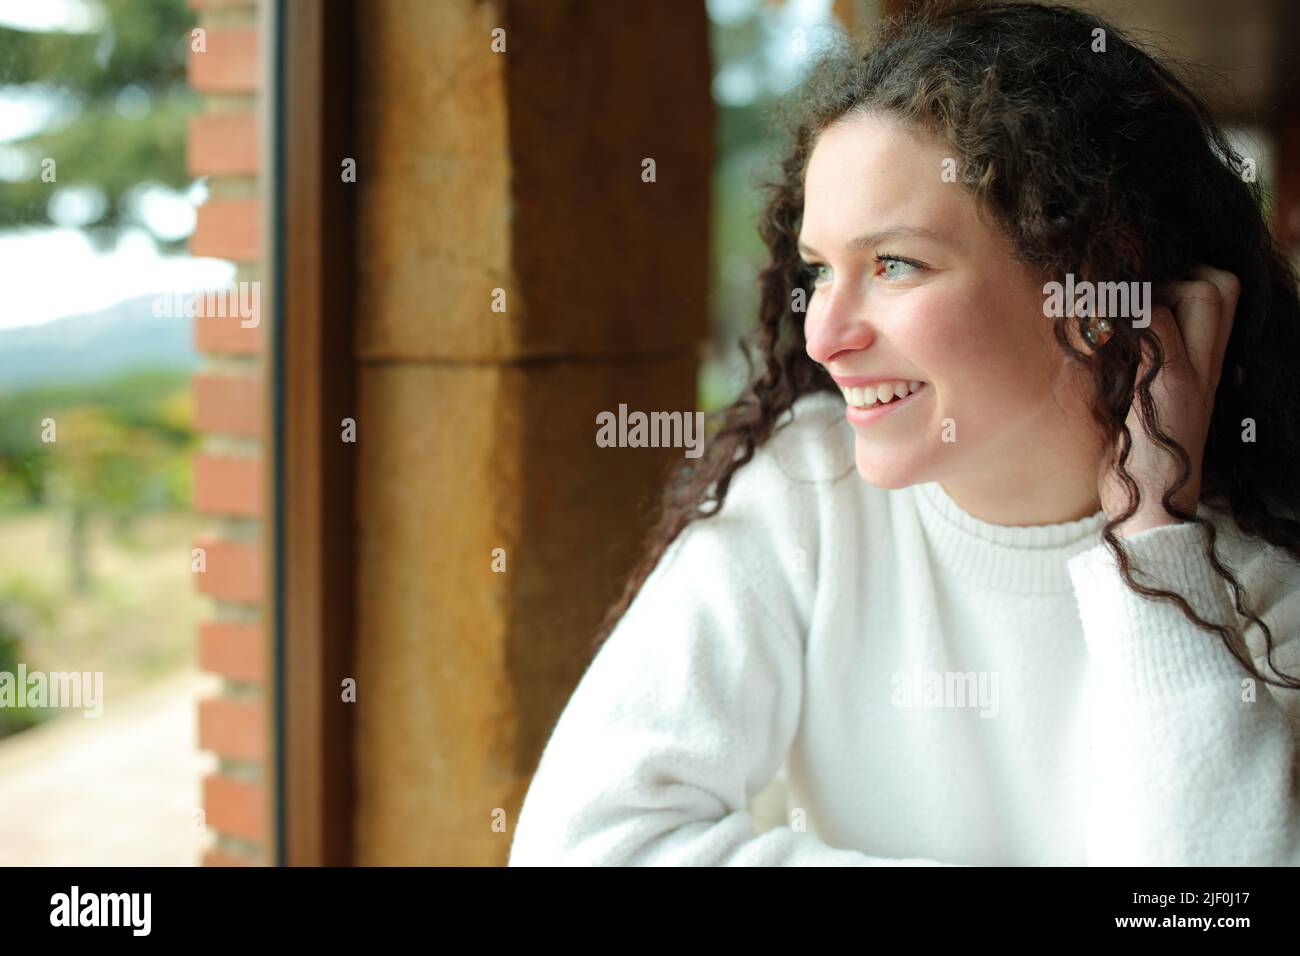 Happy female looks through a window sitting in a house interior Stock Photo